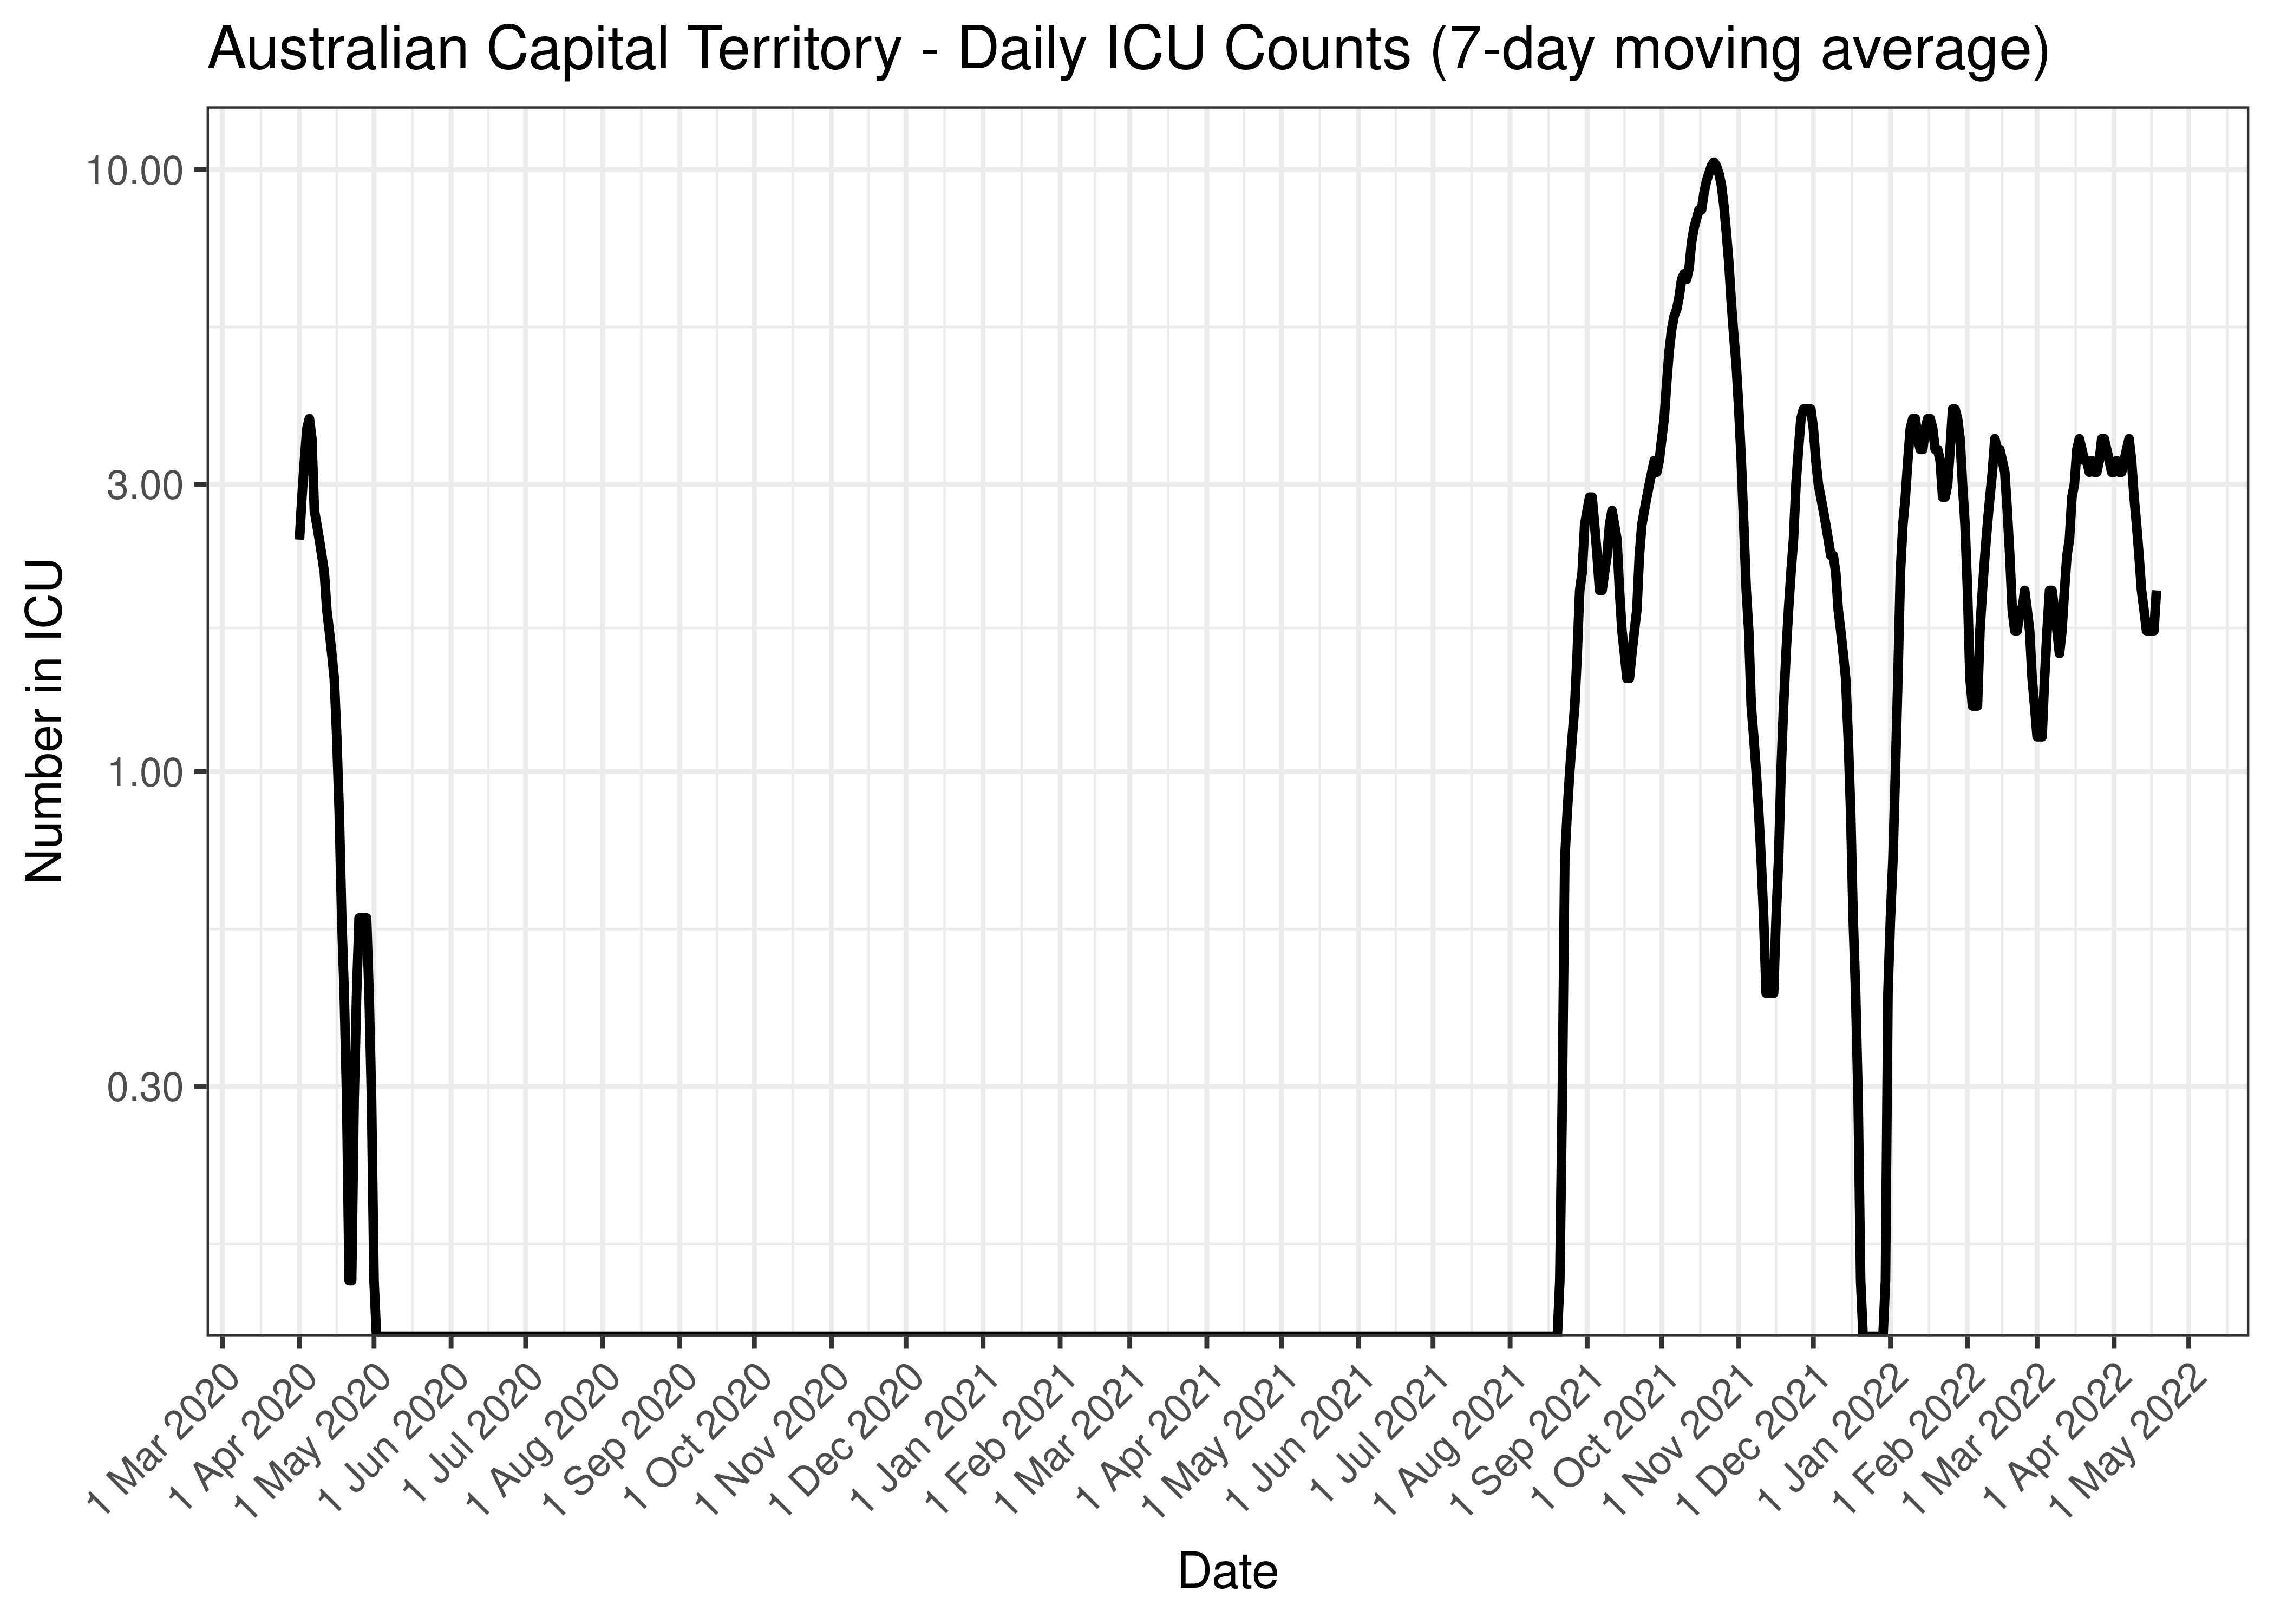 Australian Capital Territory - Daily ICU Counts (7-day moving average)